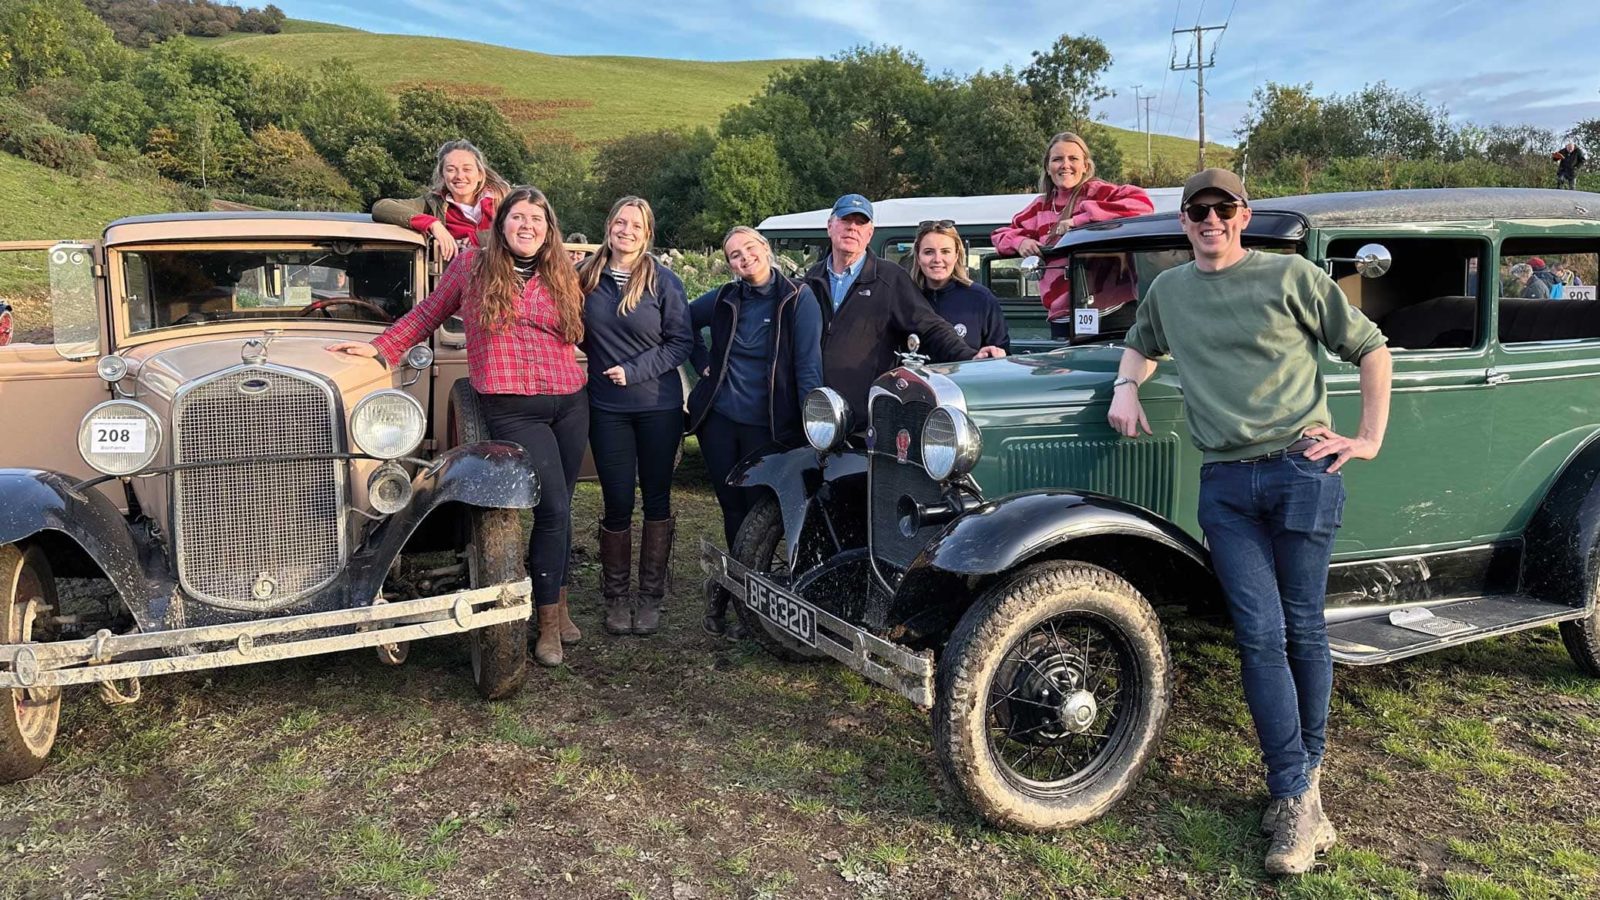 Team photo at the Welsh Trial in October 2022, with Rebecca Smith